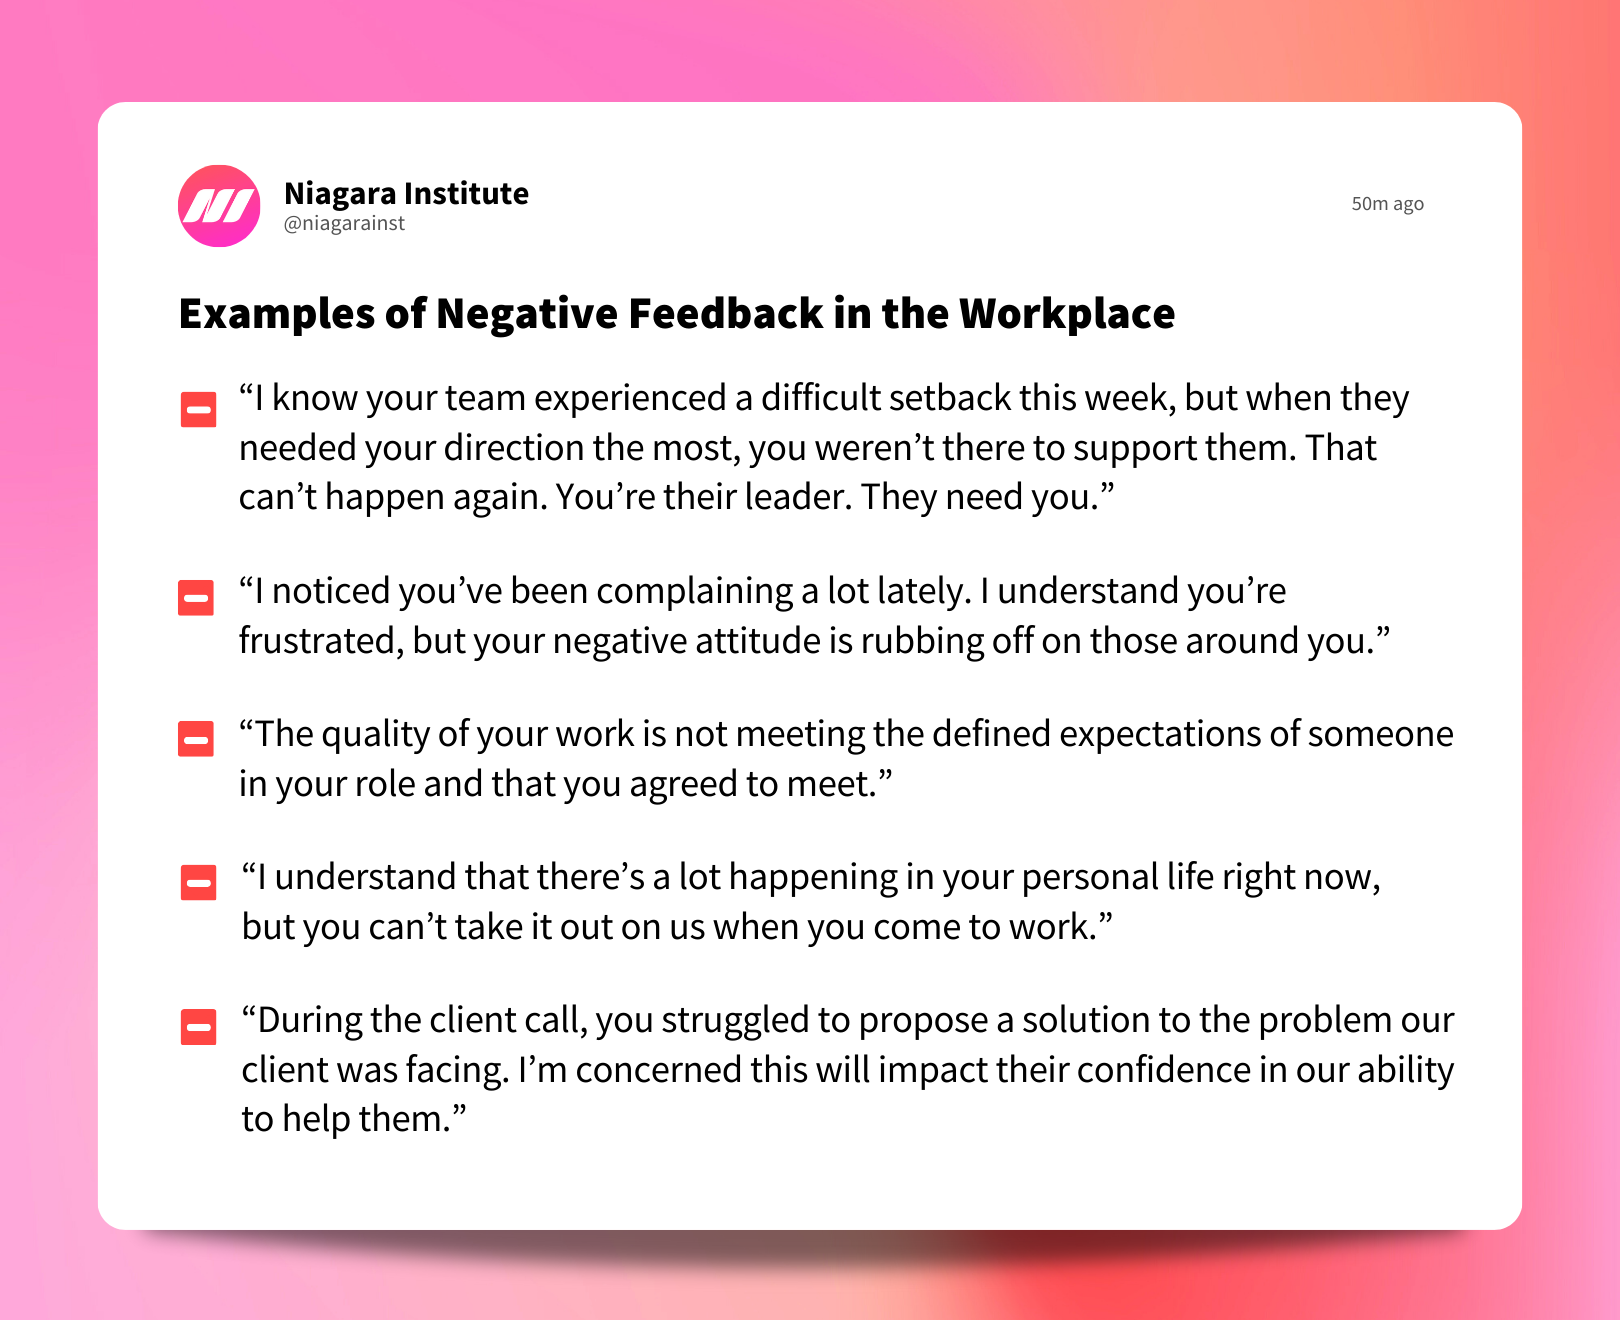 Examples of Negative Feedback in the Workplace - Niagara Institute